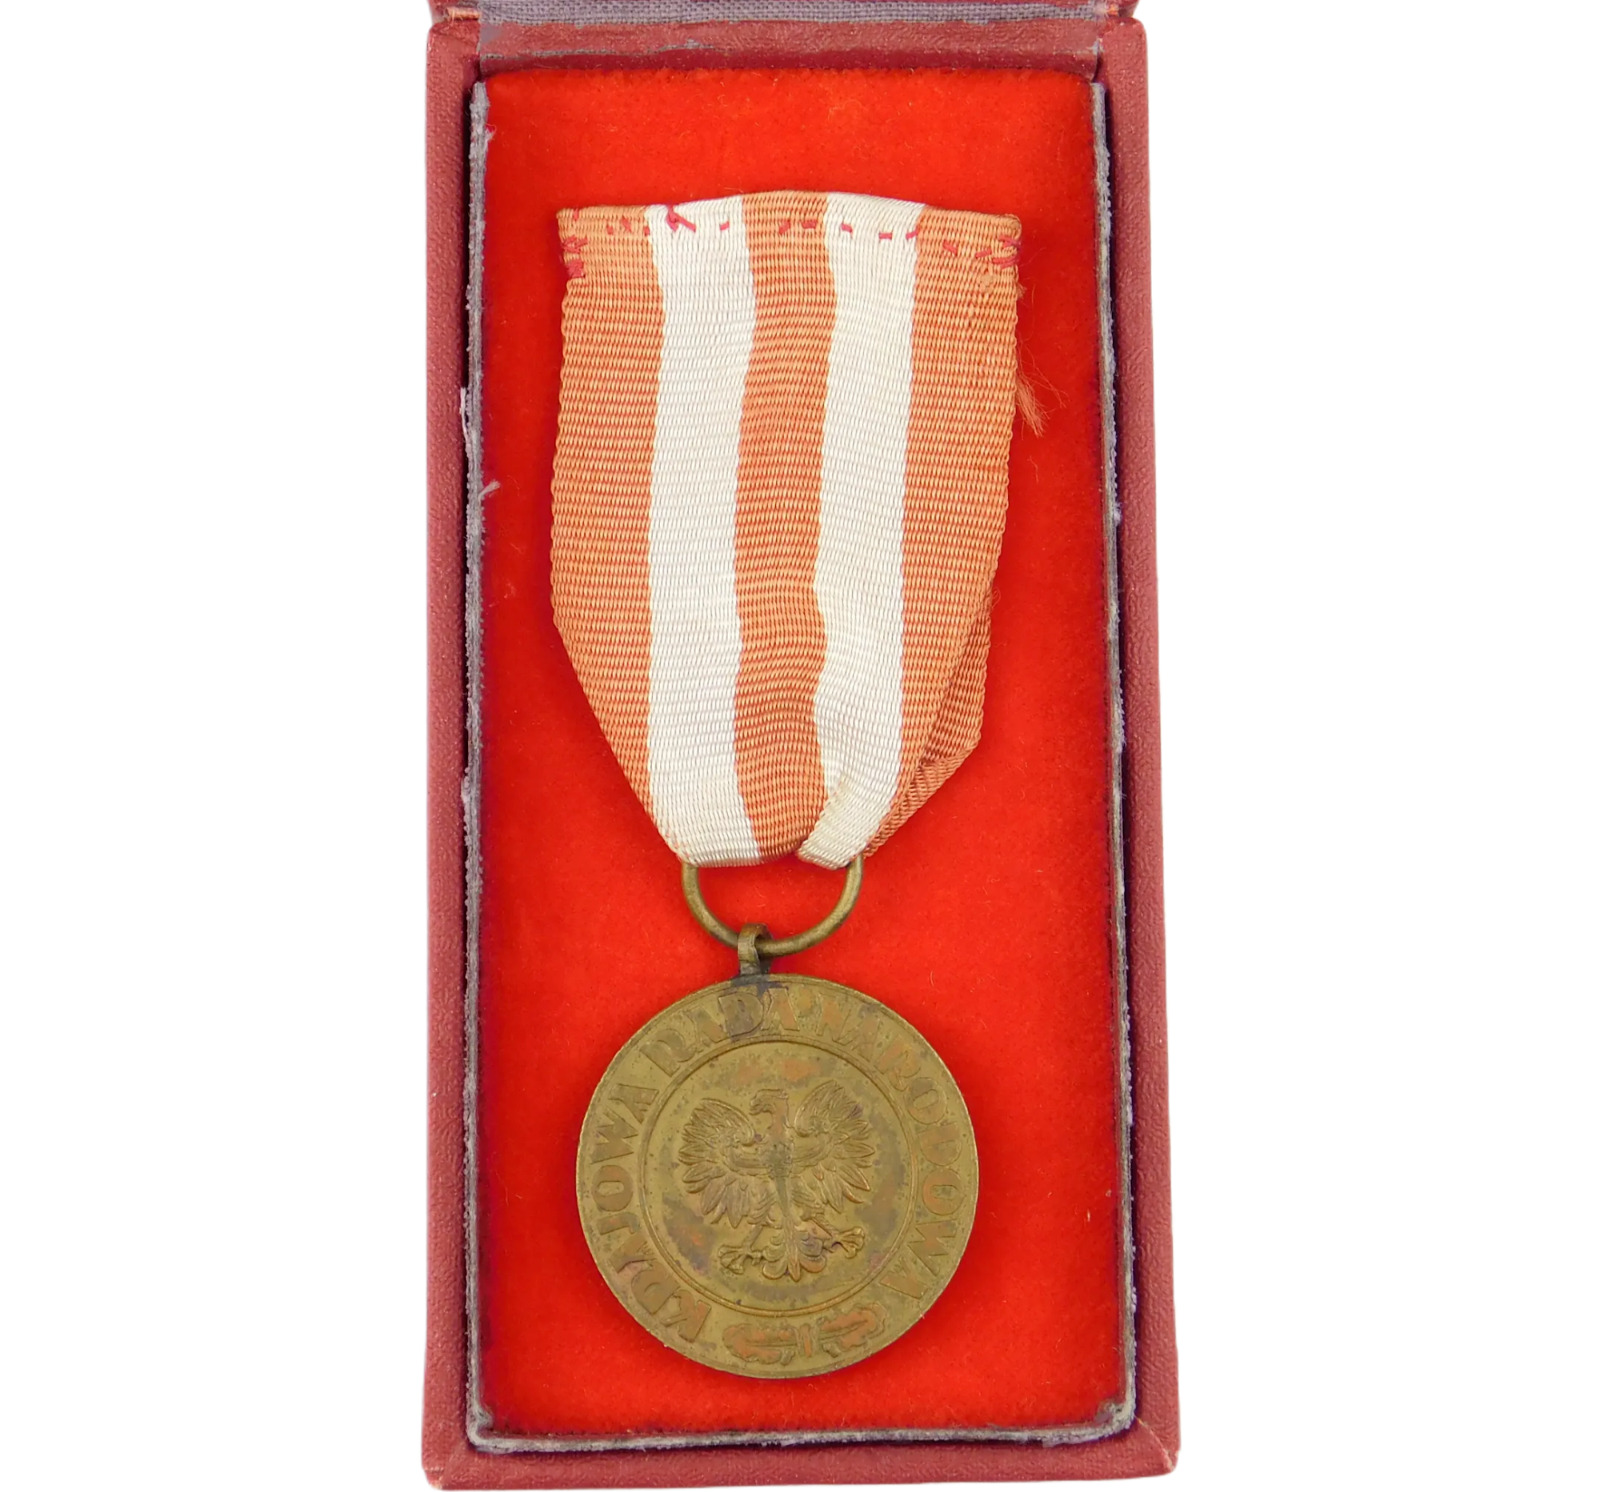 2952 WW2 BOXED POLISH MEDAL FOR VICTORY AND FREEDOM 1945 POLAND